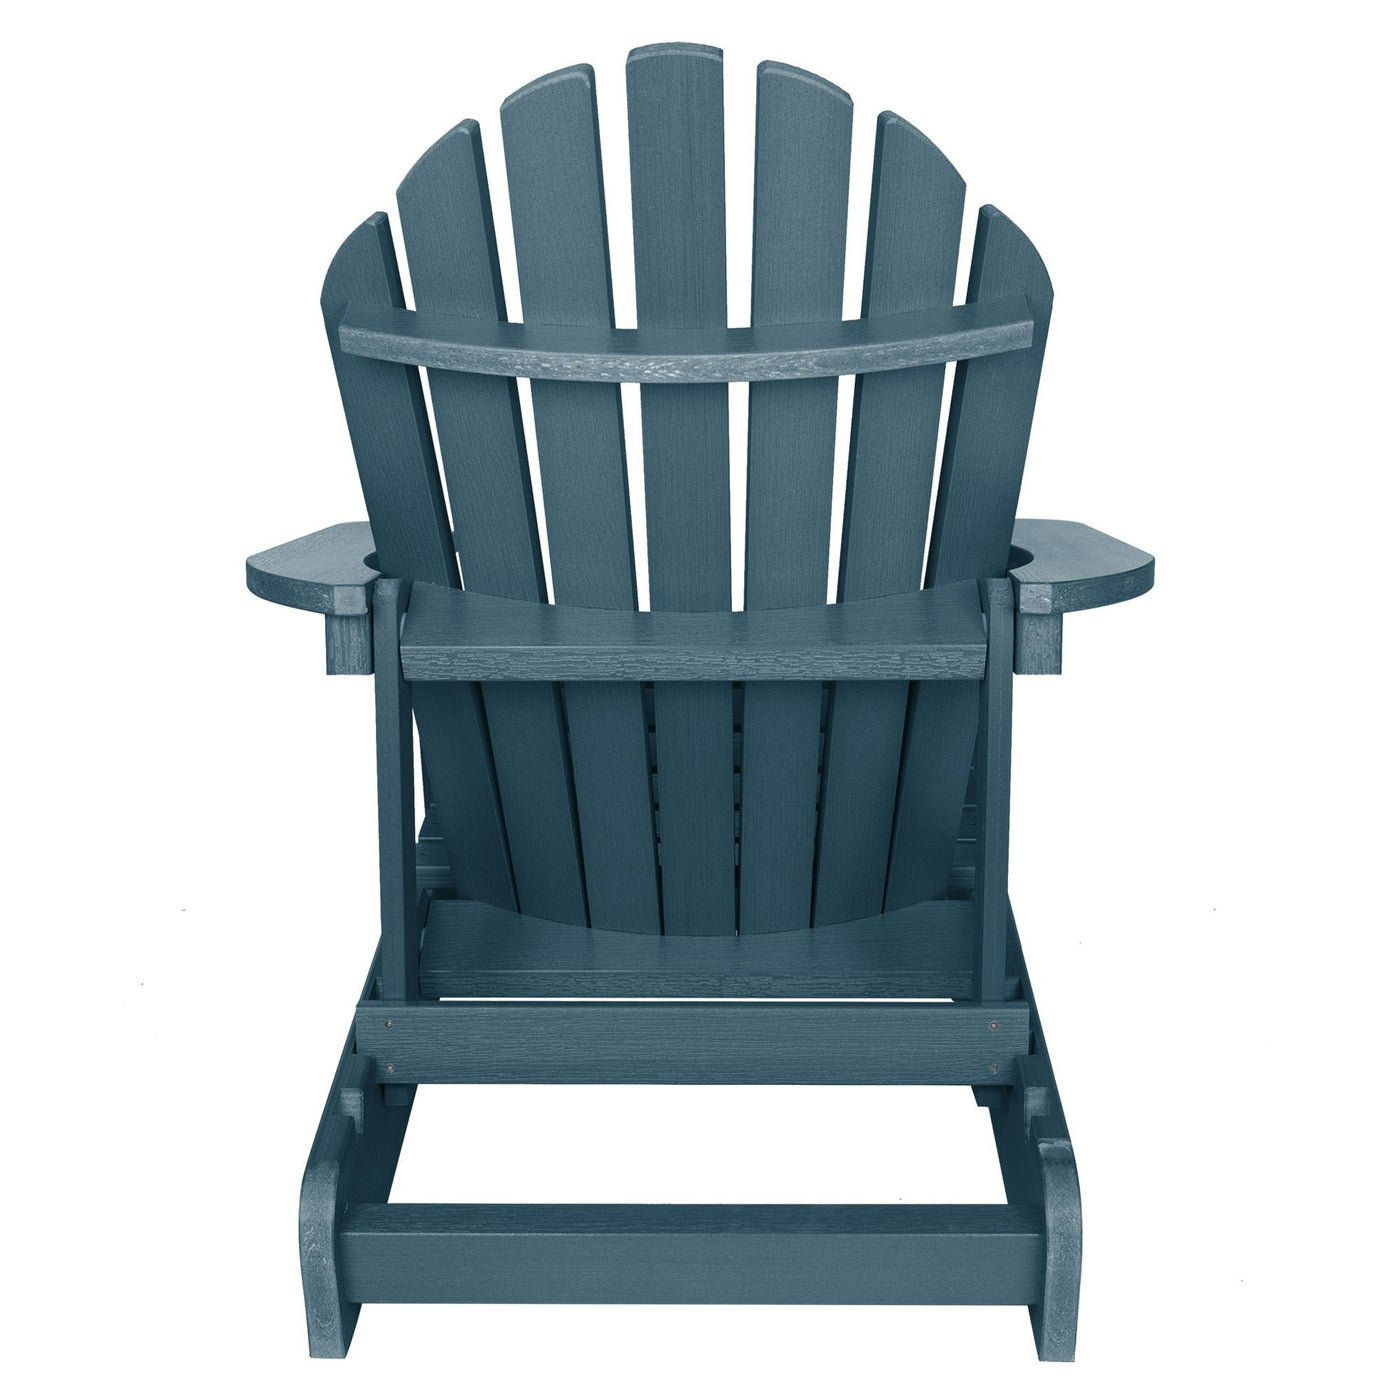 Back view of Hamilton Adirondack chair in Nantucket Blue